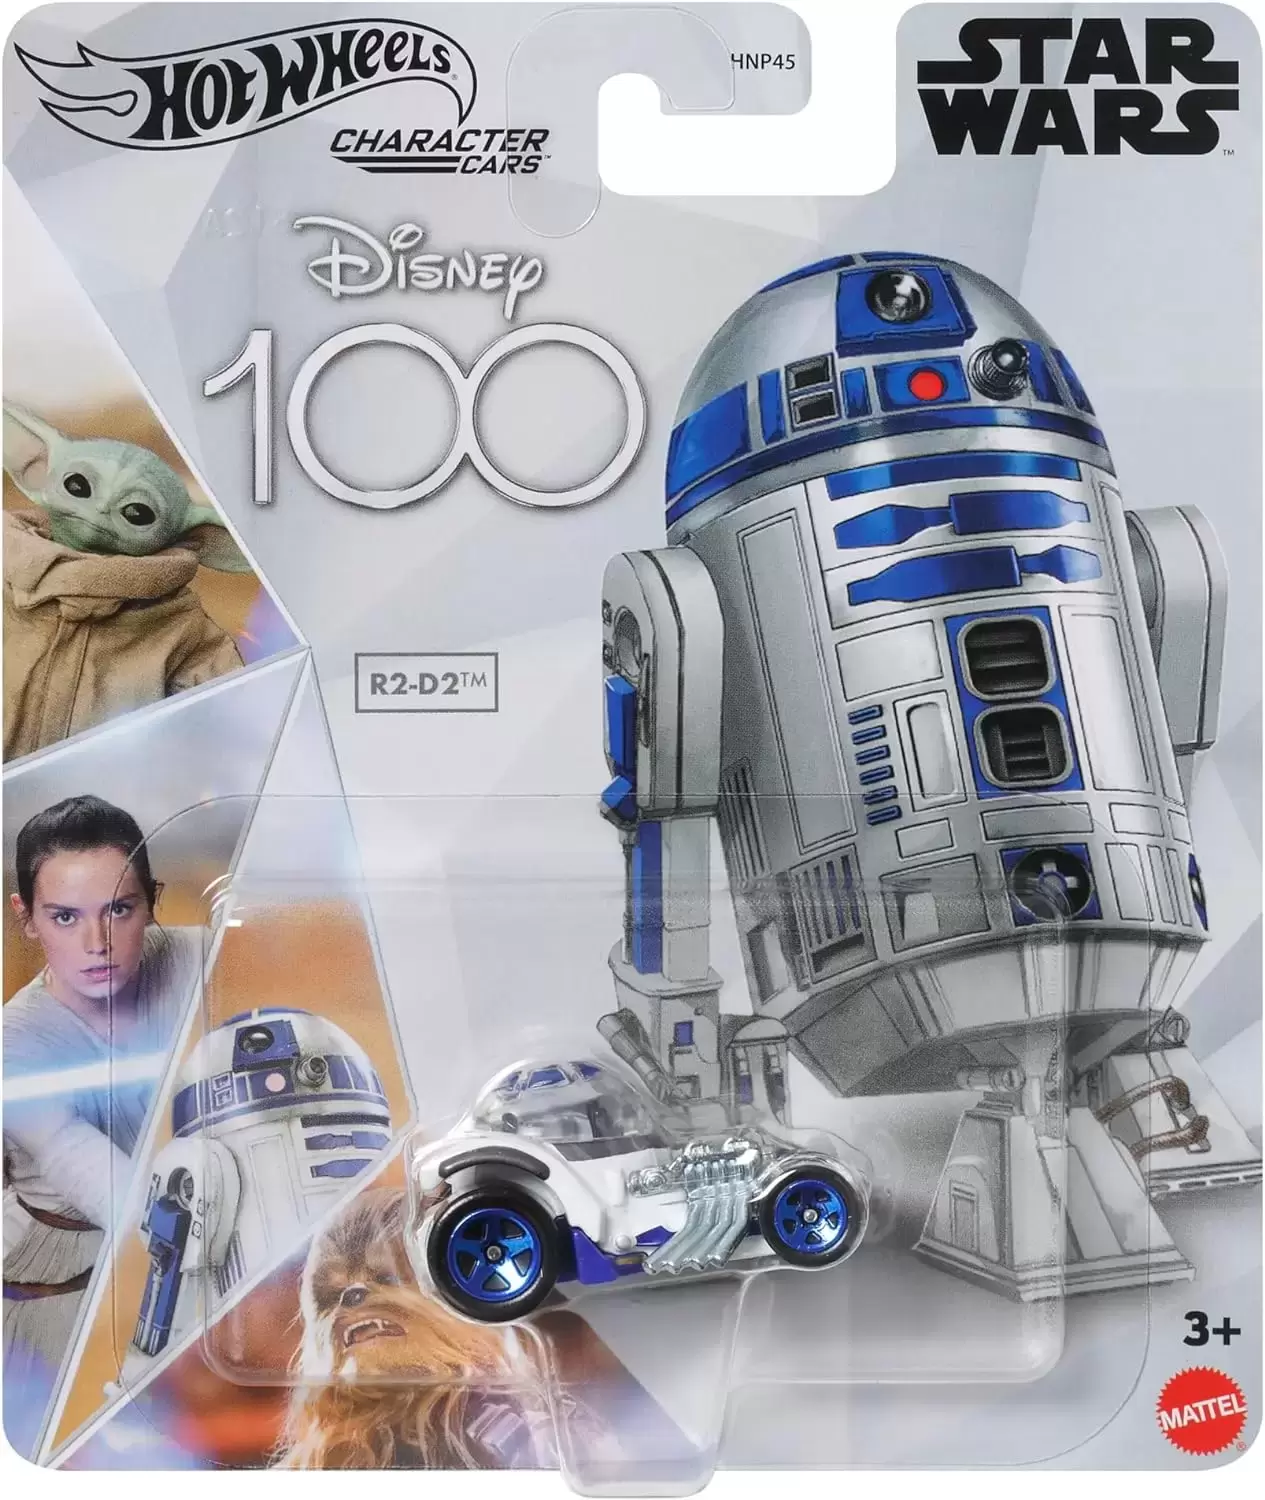 Character Cars Star Wars - R2-D2